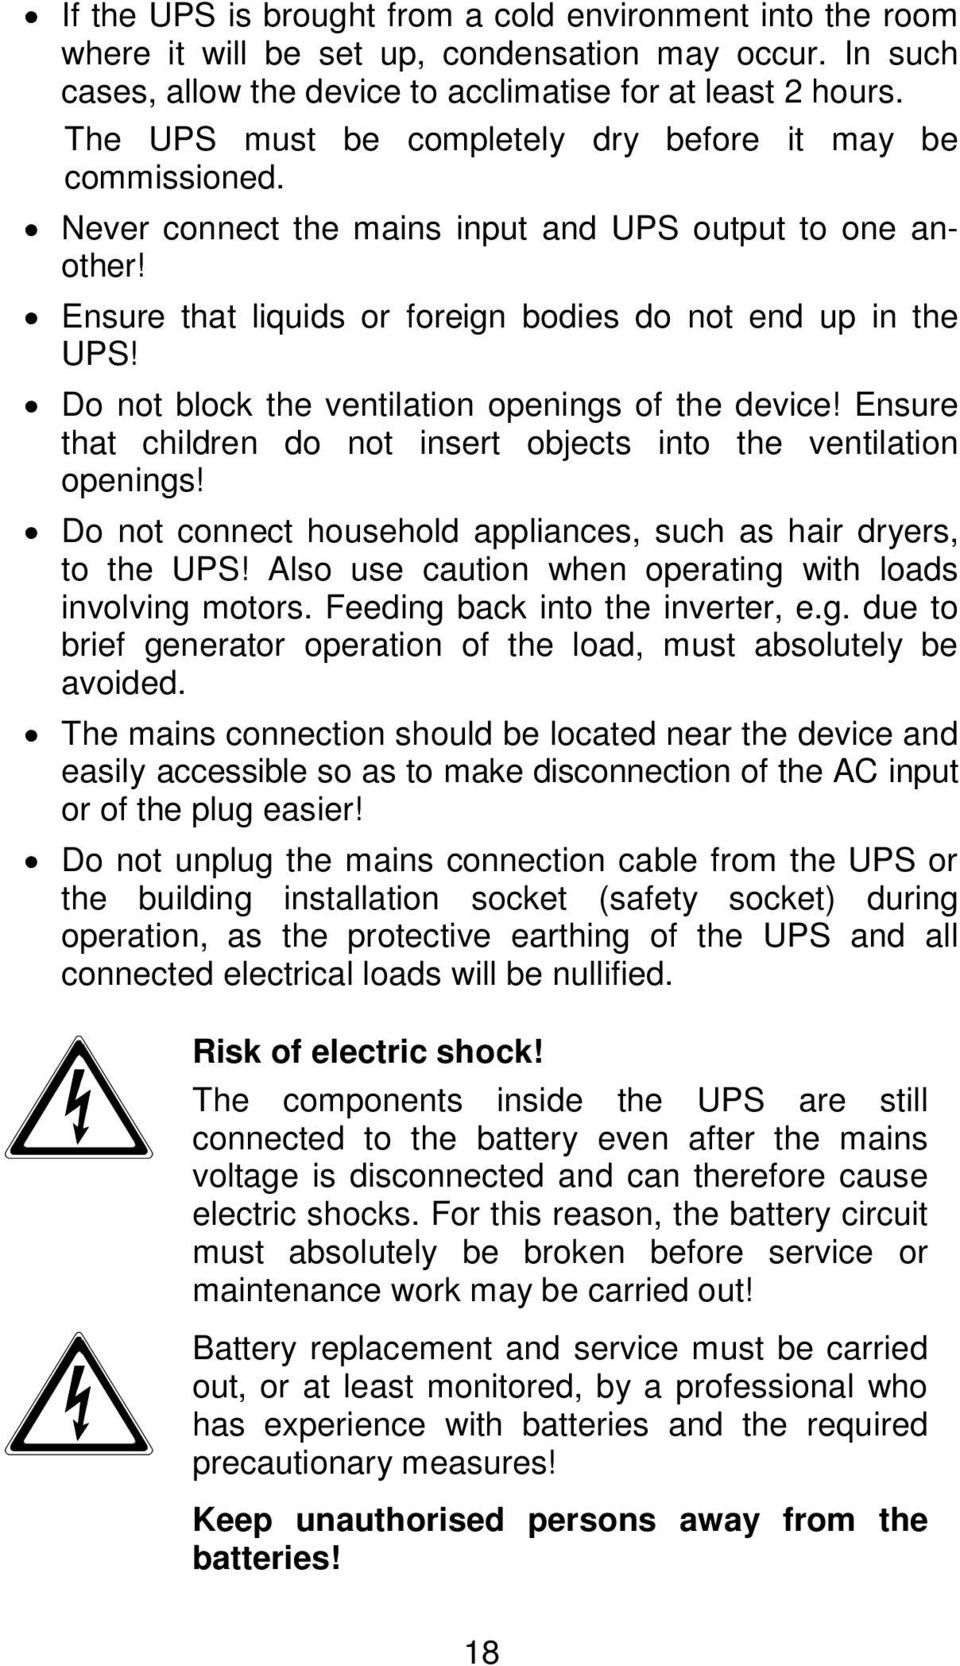 Do not block the ventilation openings of the device! Ensure that children do not insert objects into the ventilation openings! Do not connect household appliances, such as hair dryers, to the UPS!